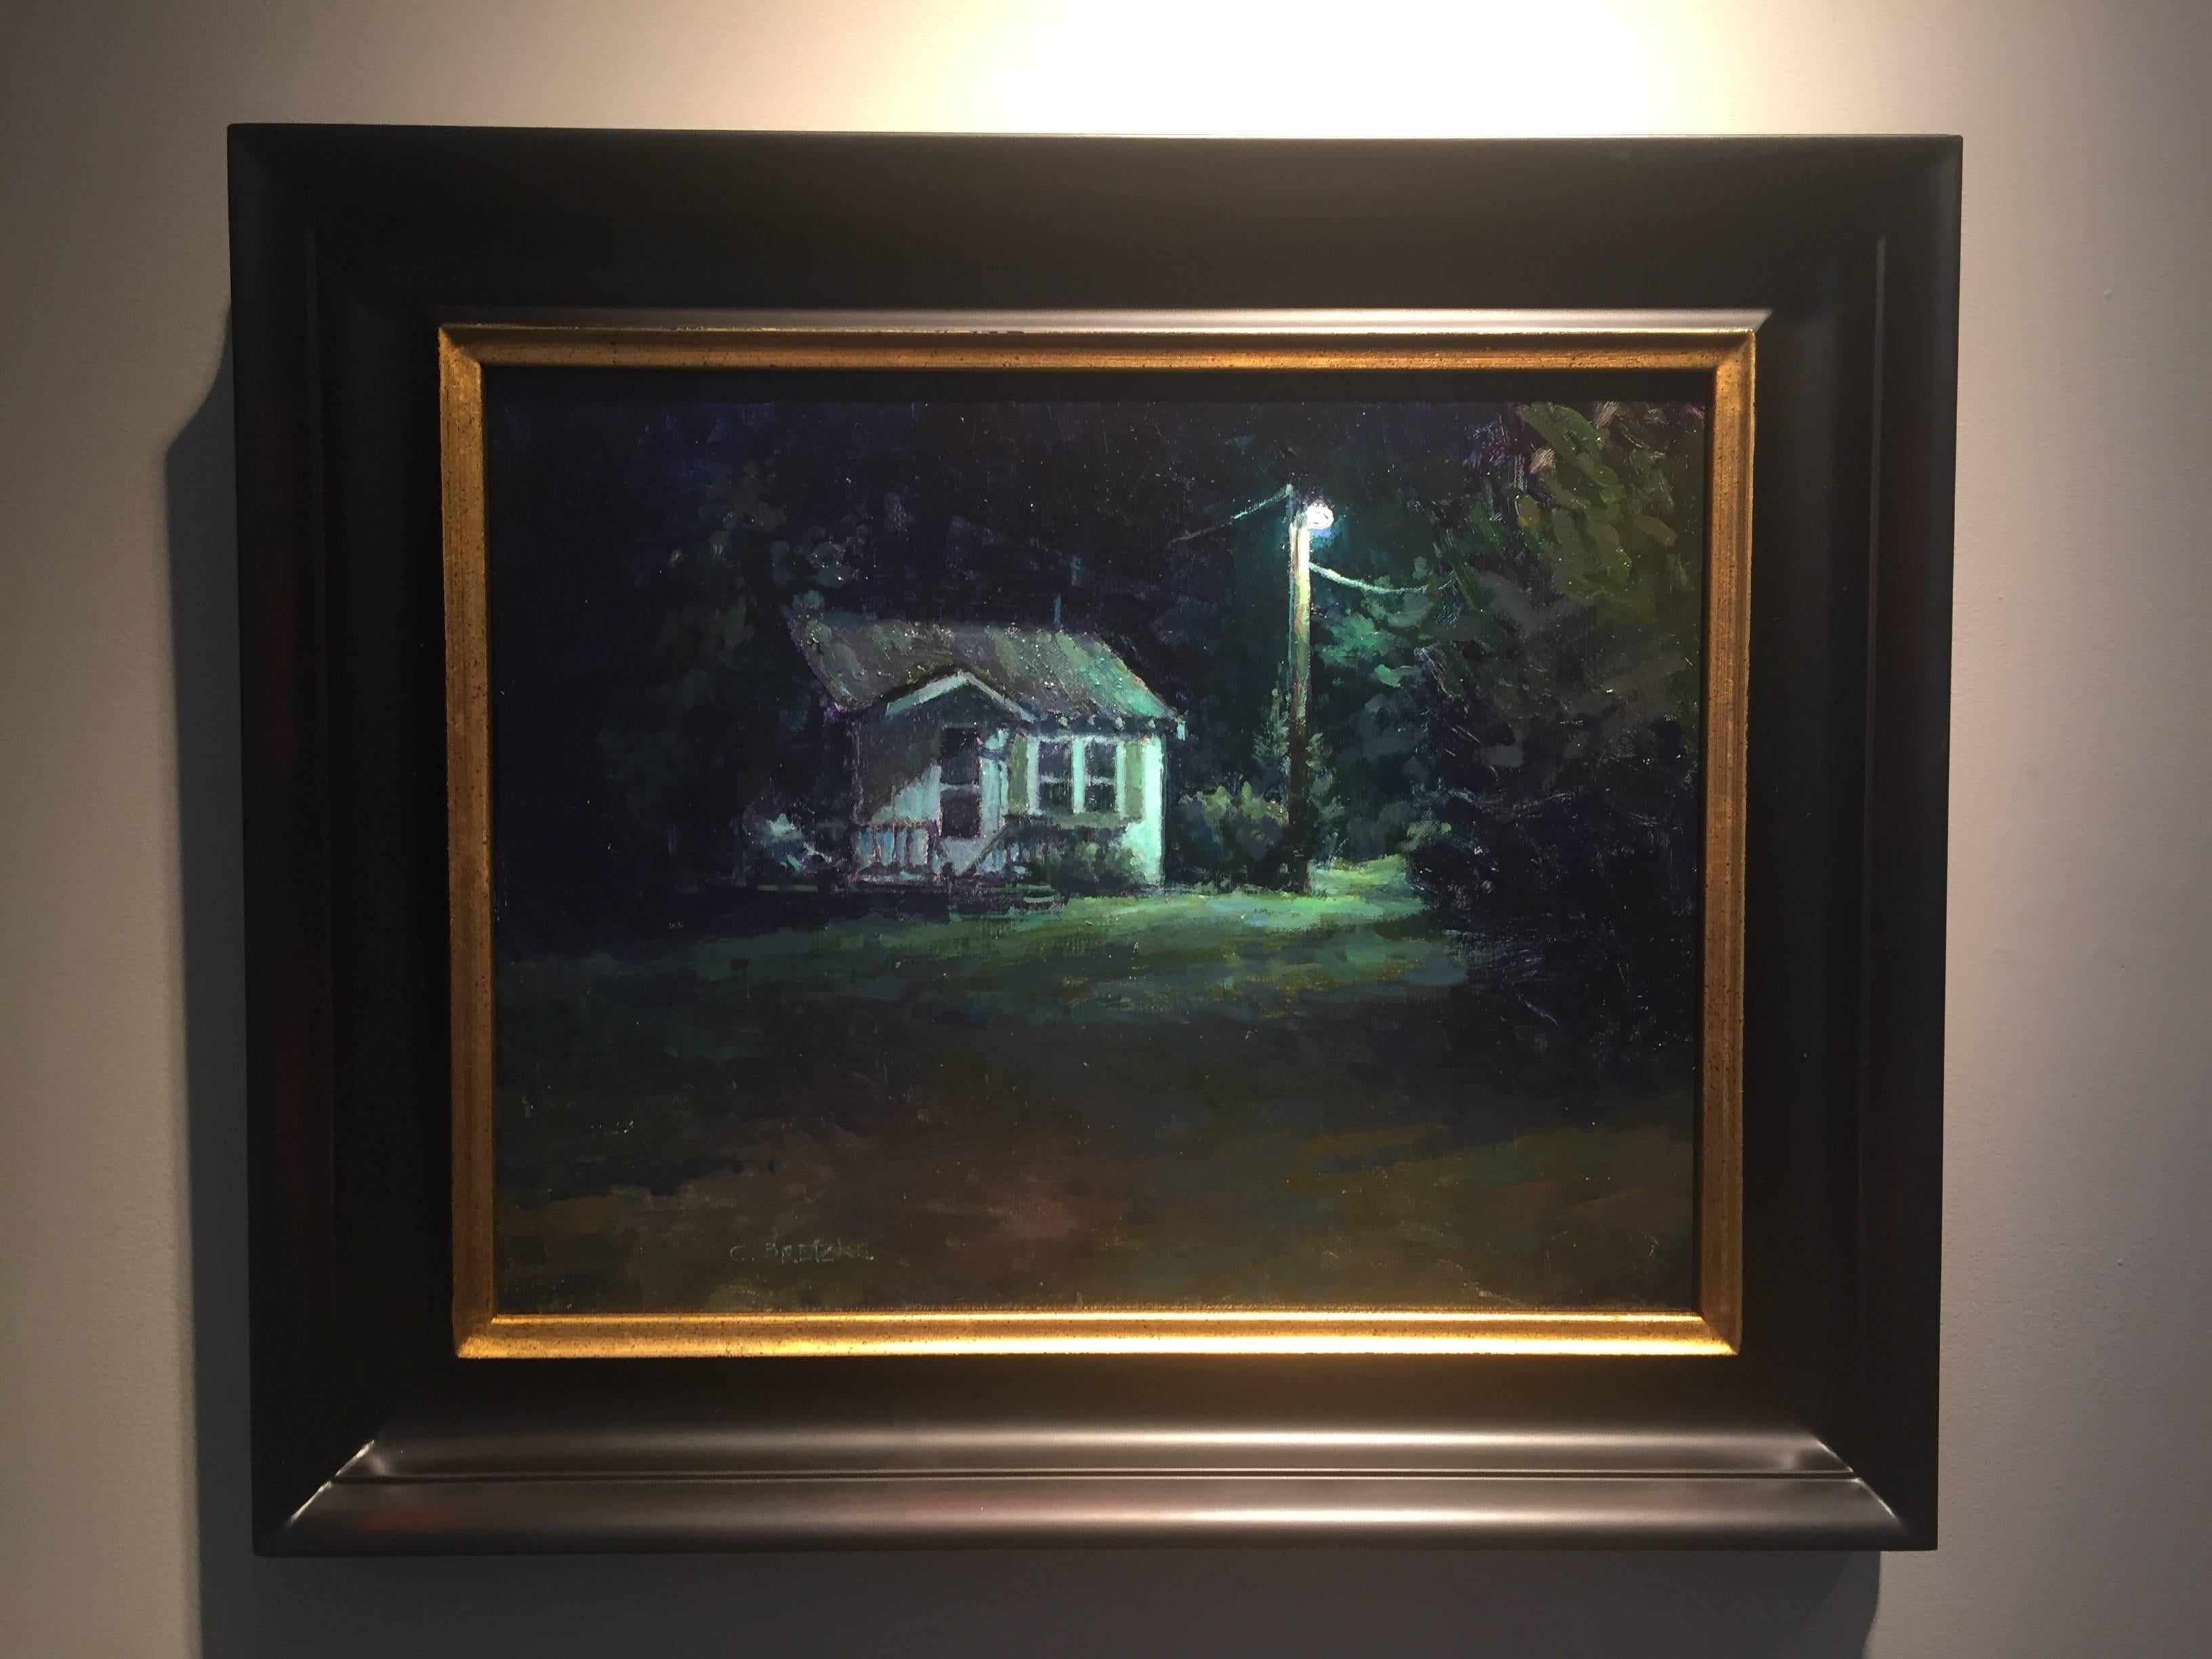 Cool Light on the White Cabin - Painting by Carl Bretzke